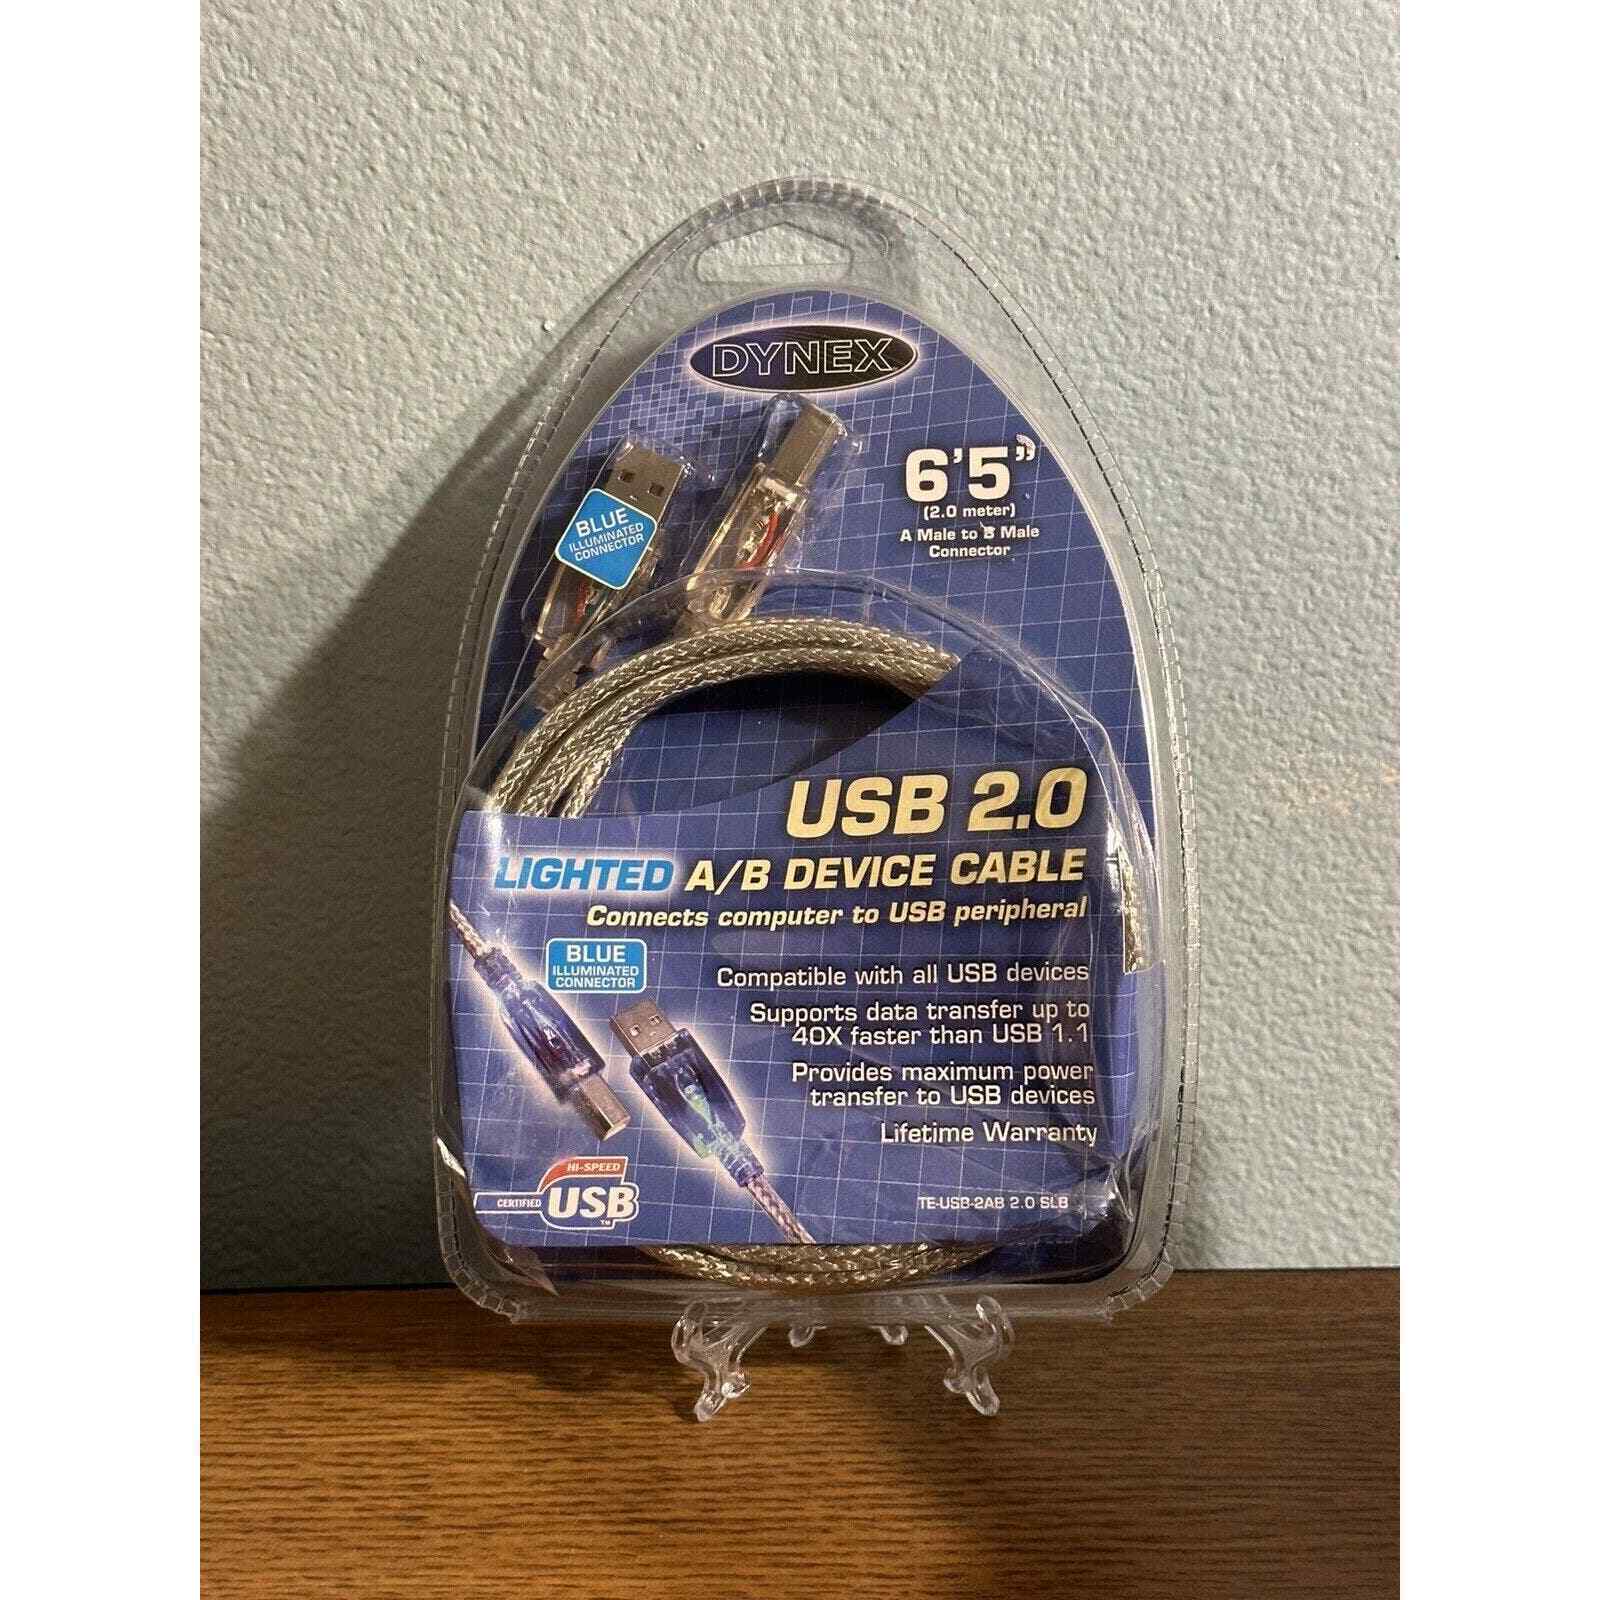 DYNEX USB 2.0 Device Cable 6' 5